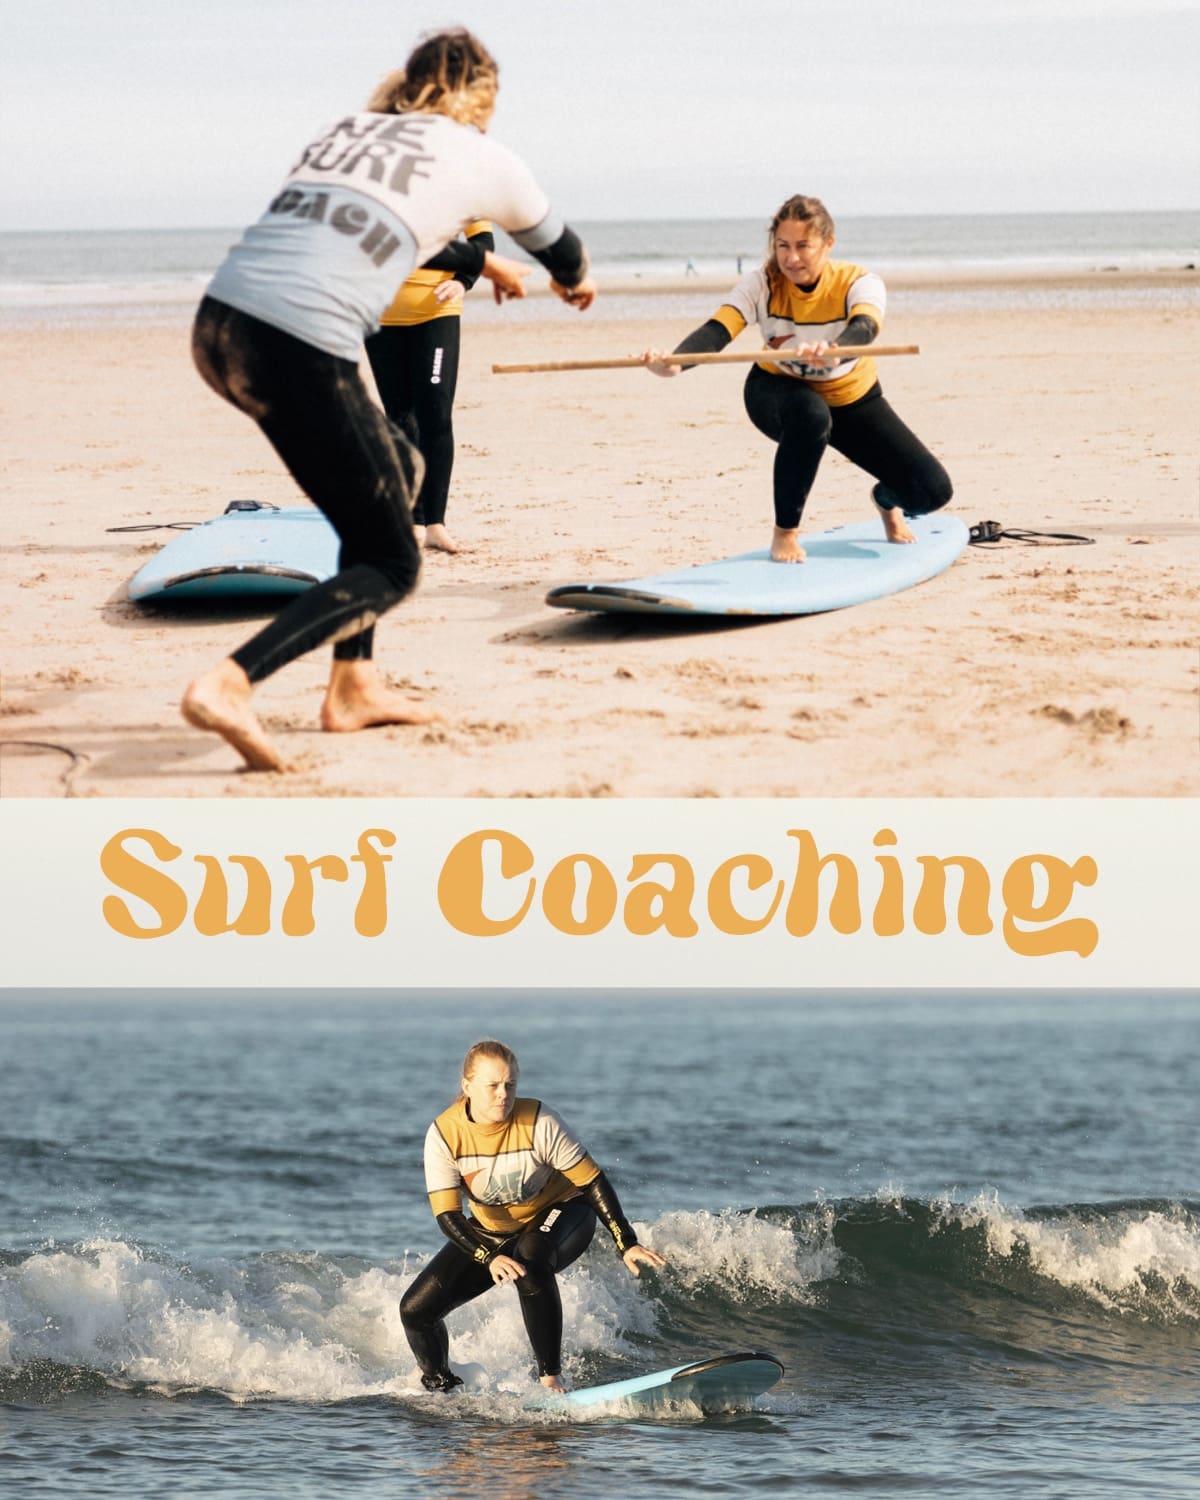 Surf coaching and surfer